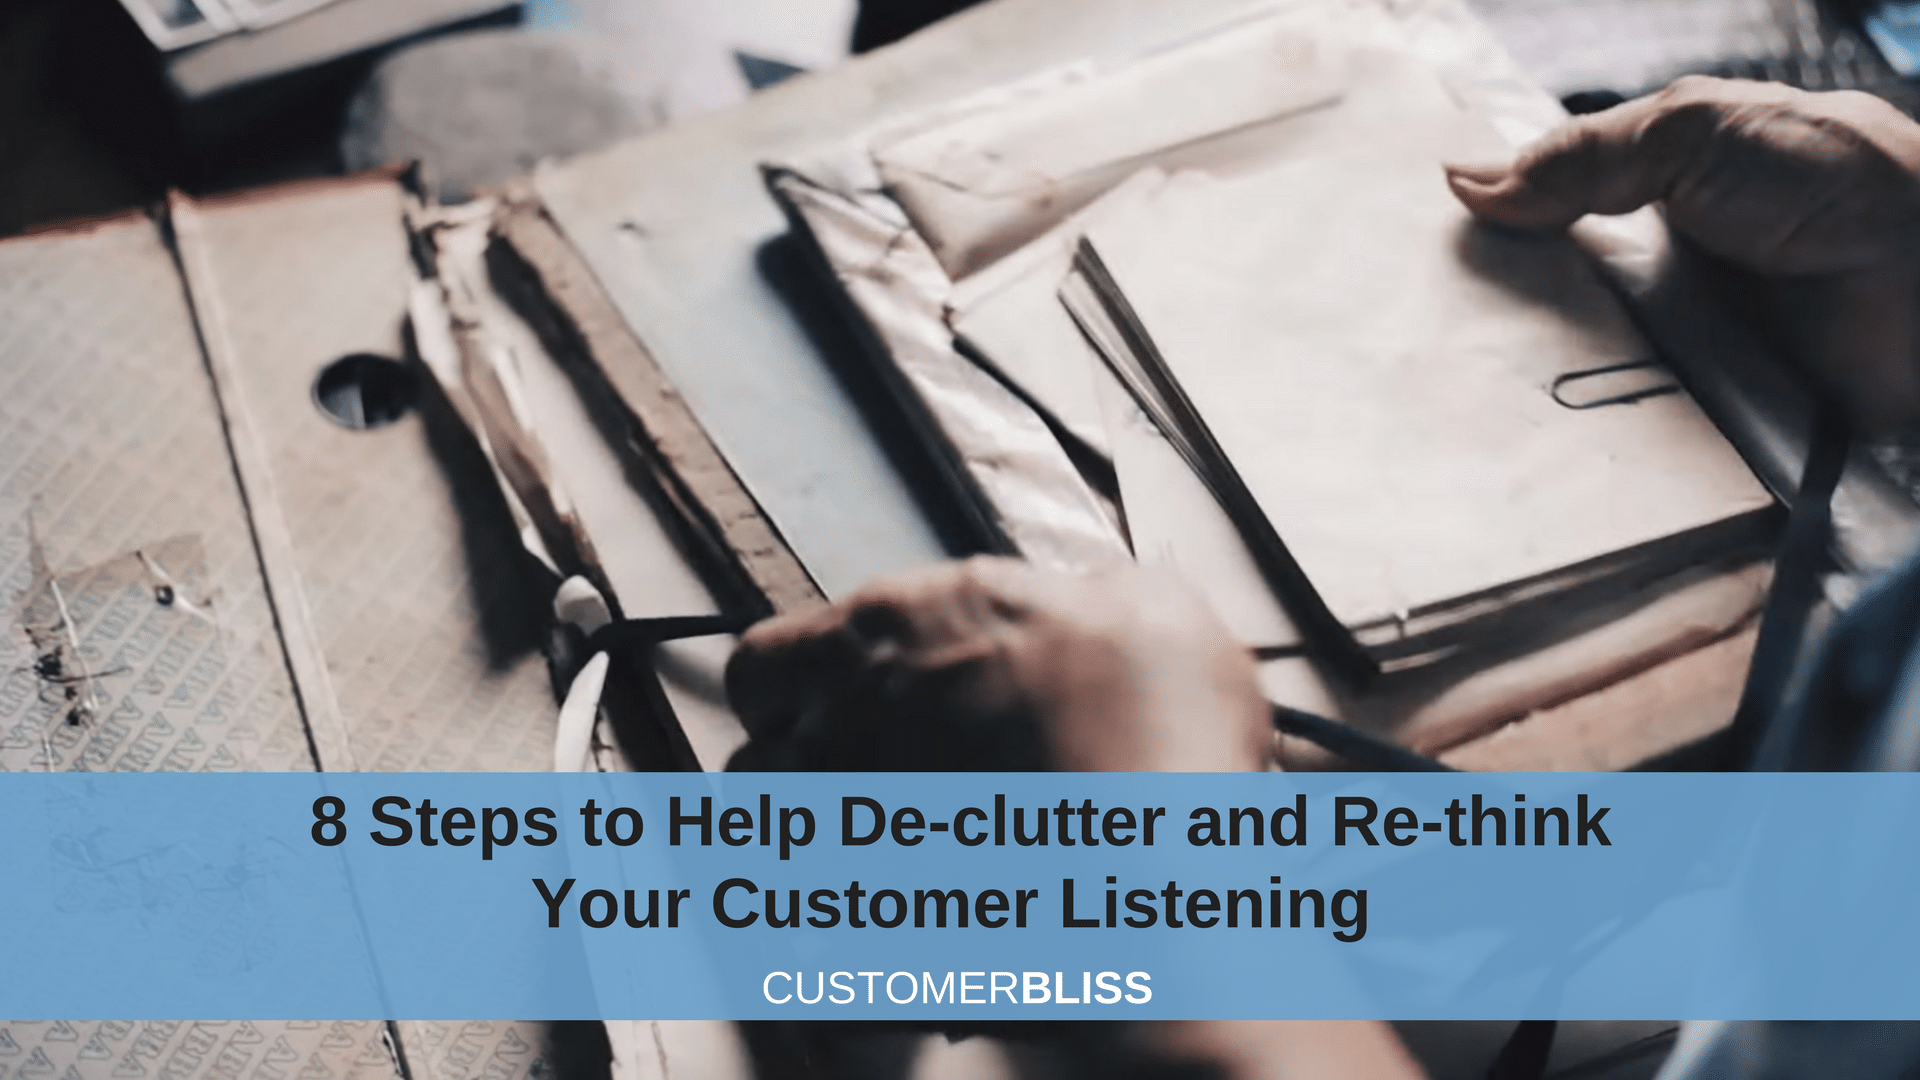 8 Steps to Help De-clutter and Re-think Your Customer Listening